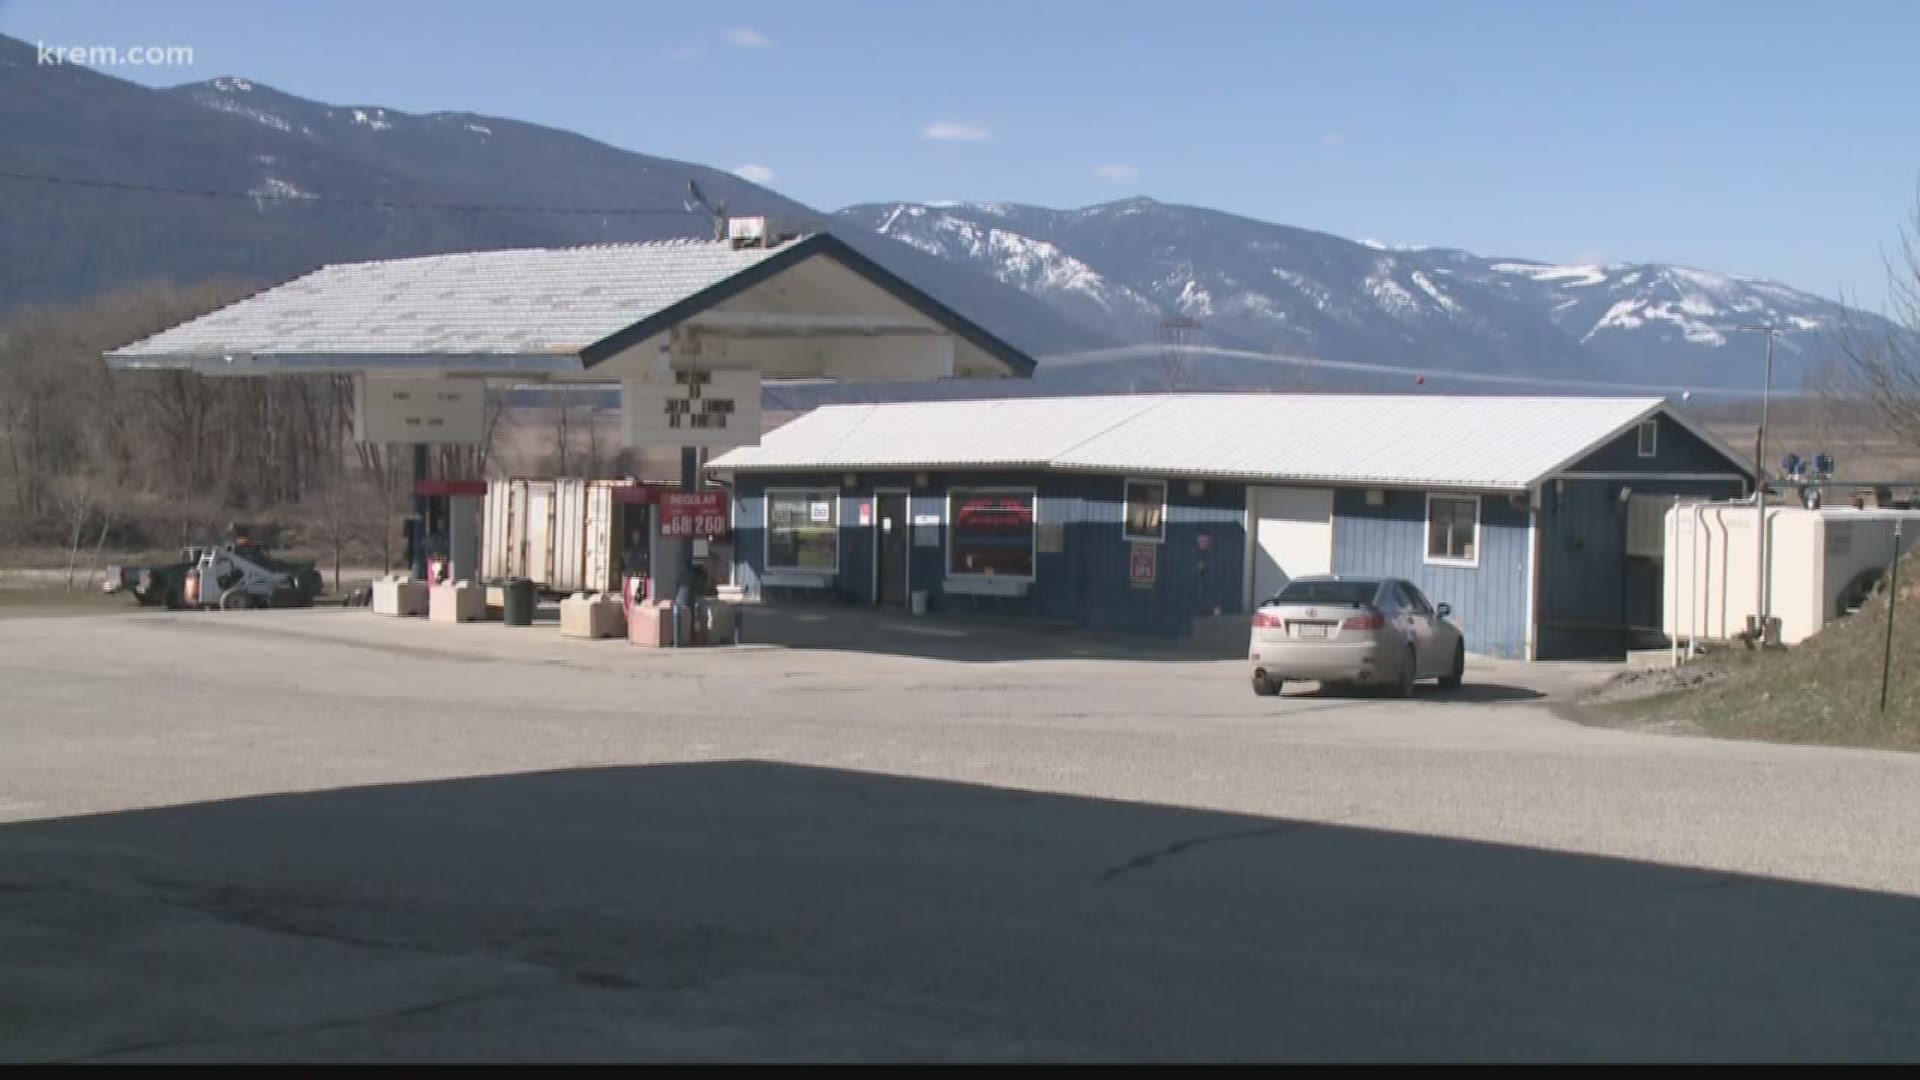 Canadians account for roughly a quarter of some businesses' customers around Bonners Ferry.